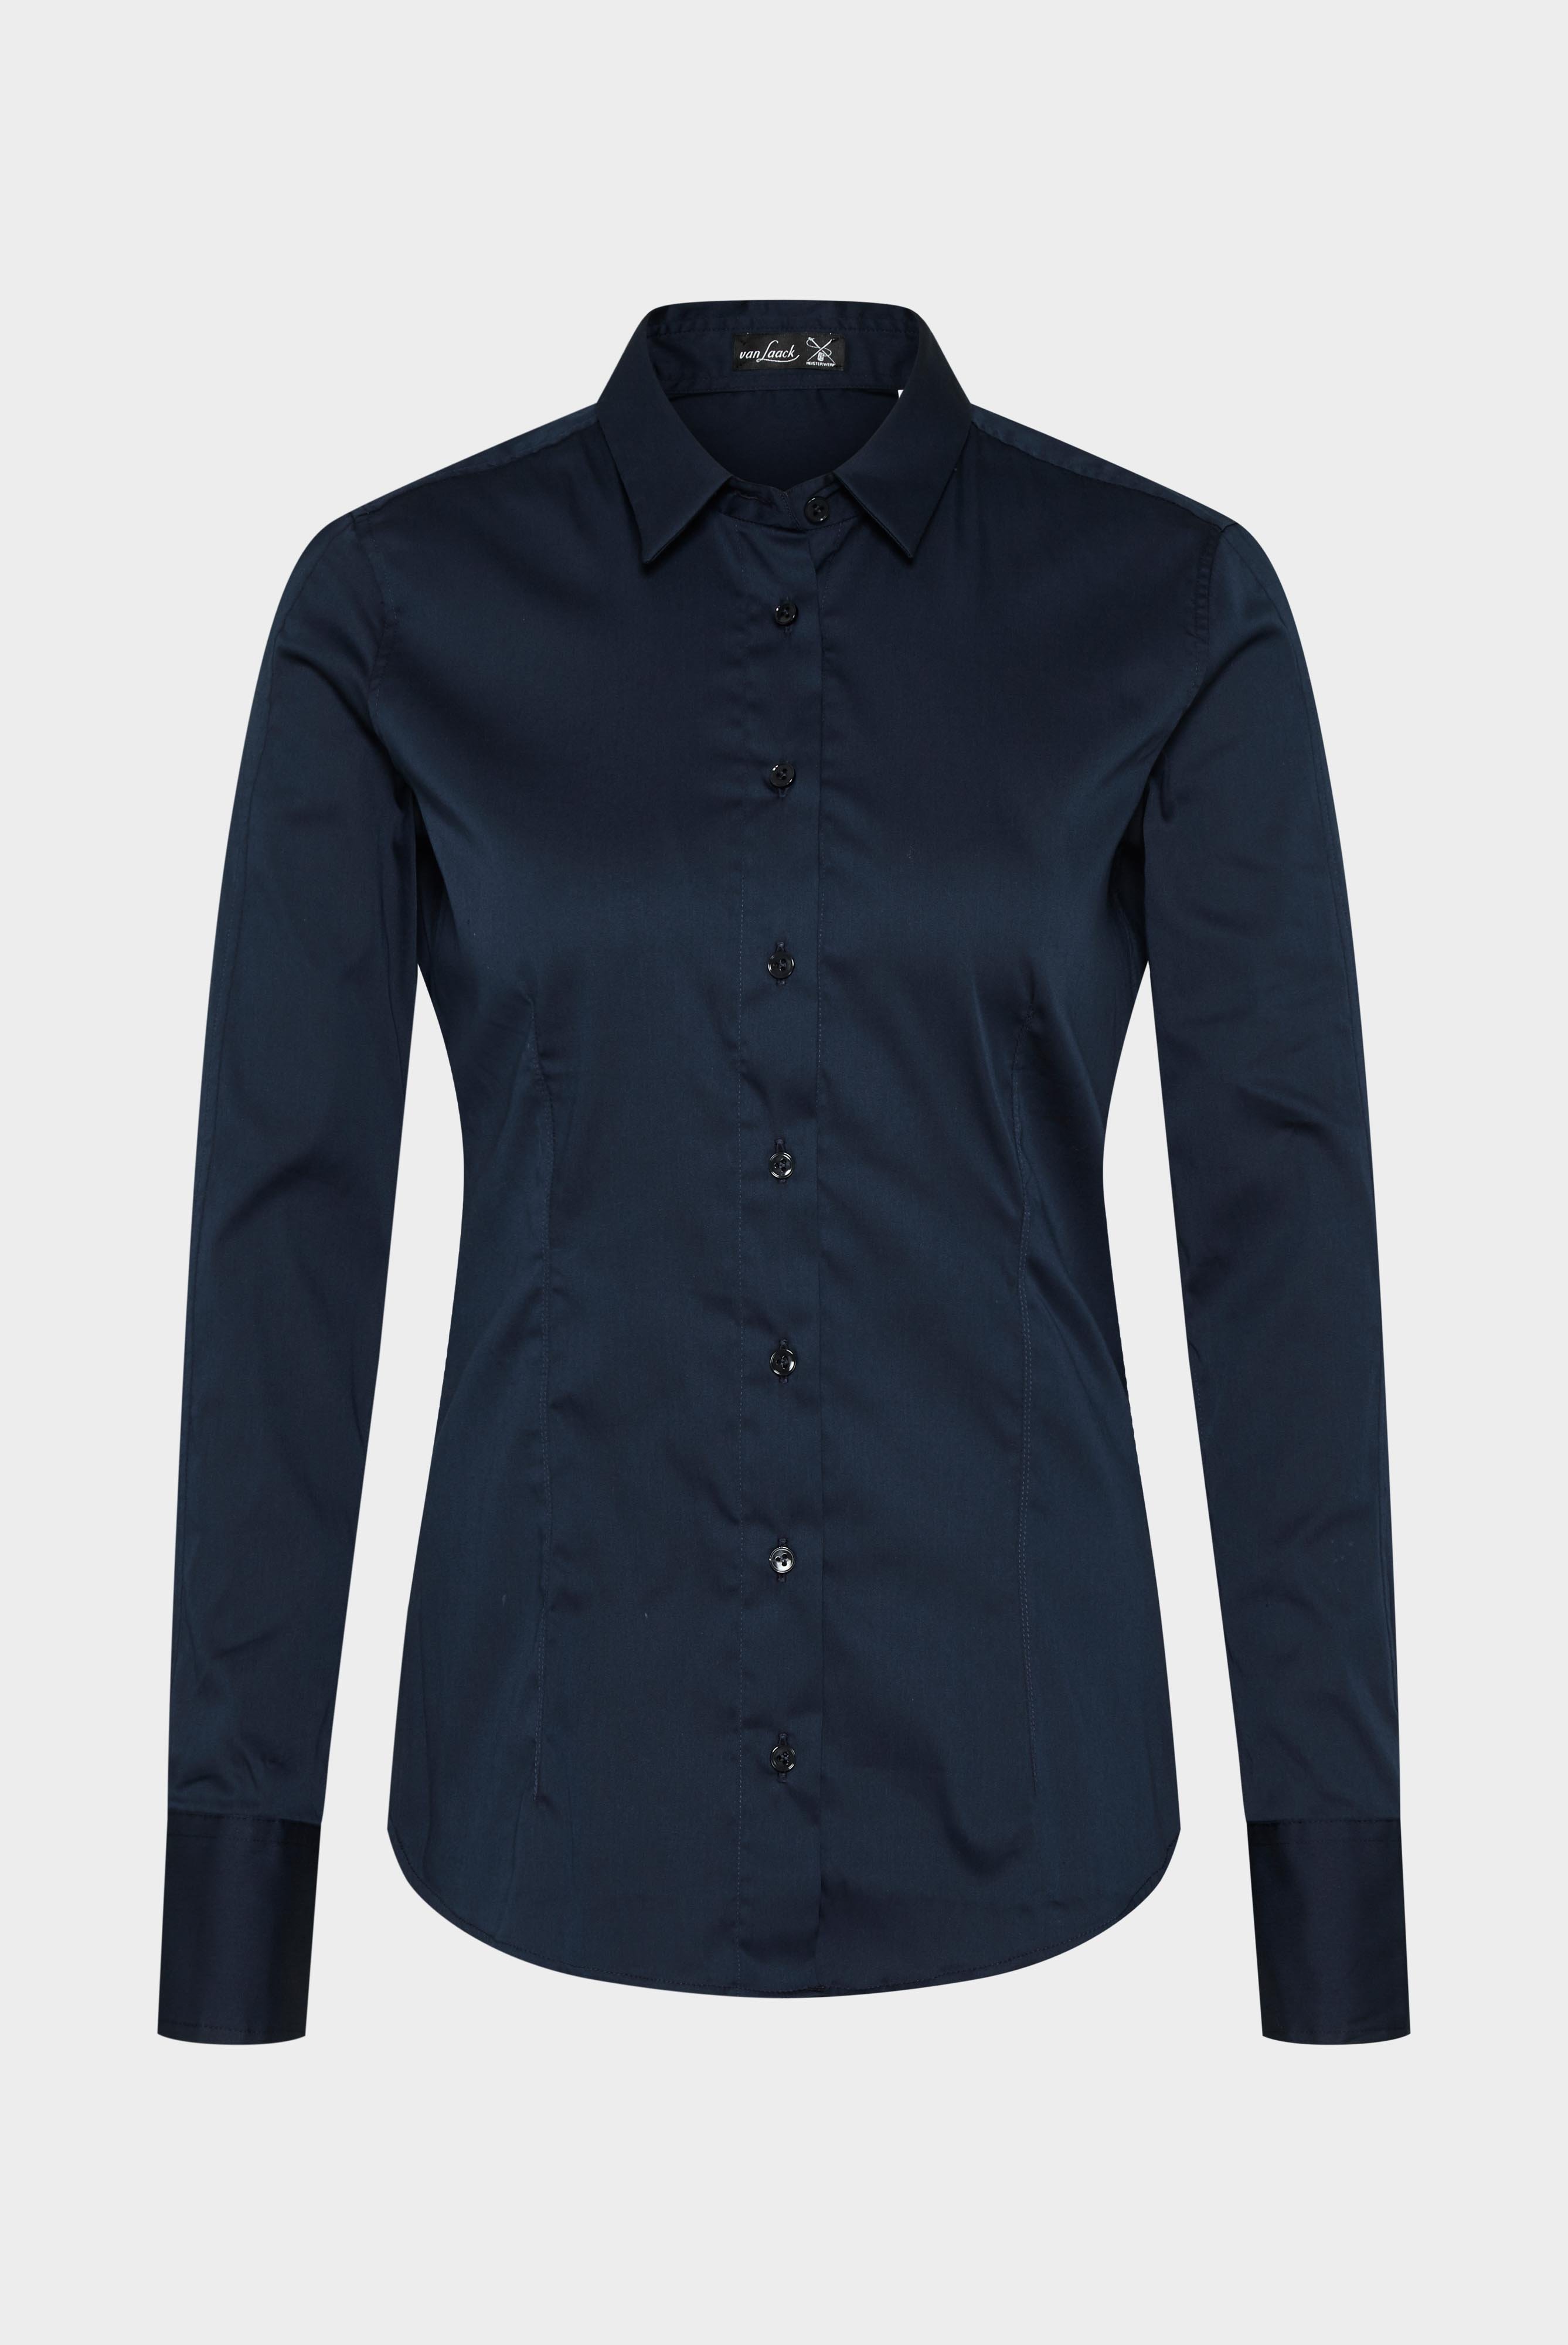 Business Blouses+Shirt Blouse with Stretch Slim Fit+05.5845.73.130830.780.32